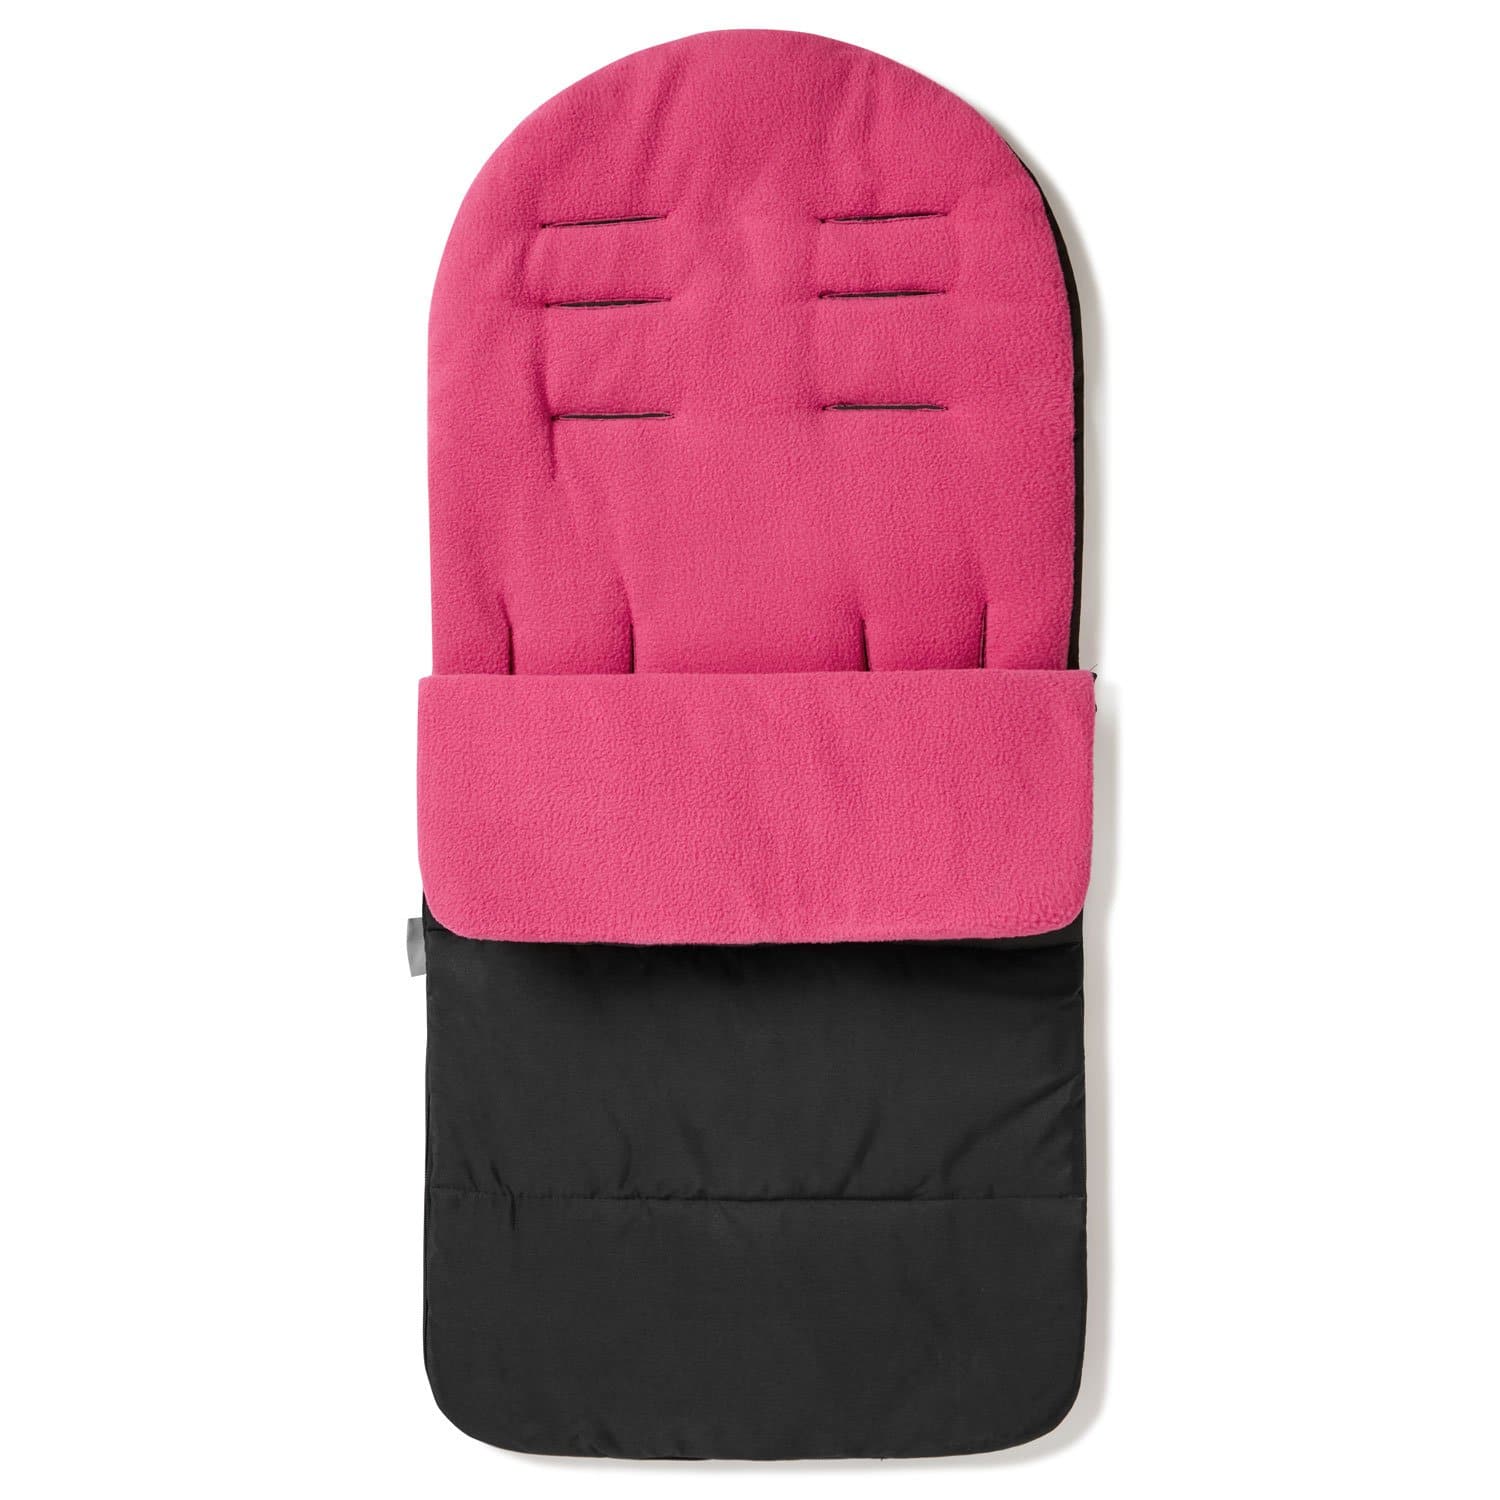 Premium Footmuff / Cosy Toes Compatible with Quinny - Pink Rose / Fits All Models | For Your Little One